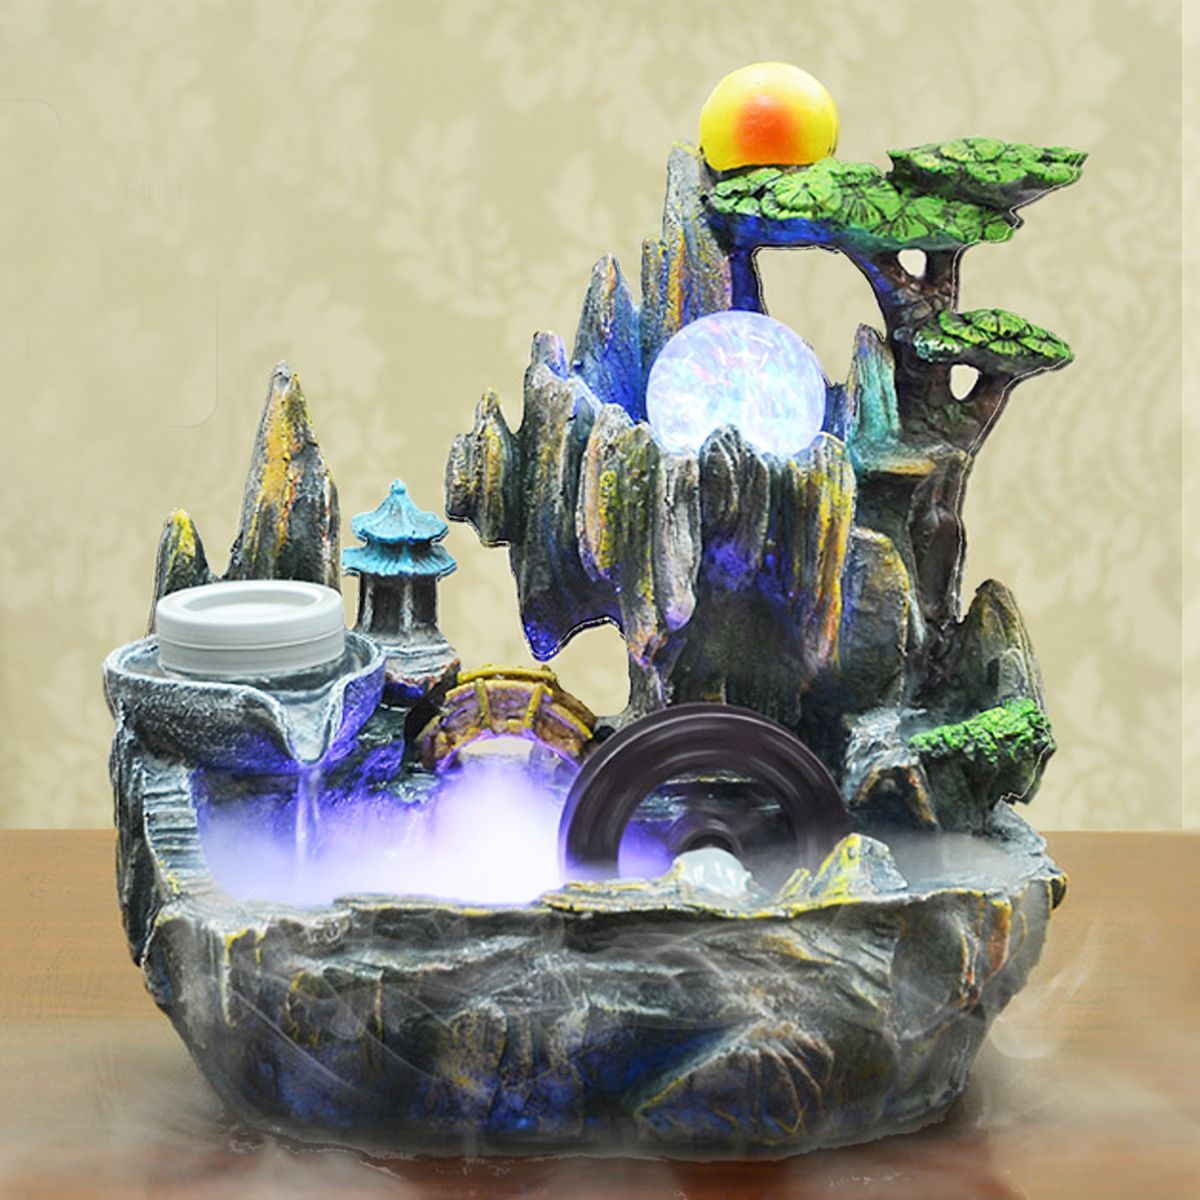 220V-Mystical-Peaceful-Indoor-Table-Bench-Top-Water-Feature-Fountain-Ornament-Decorations-1462316